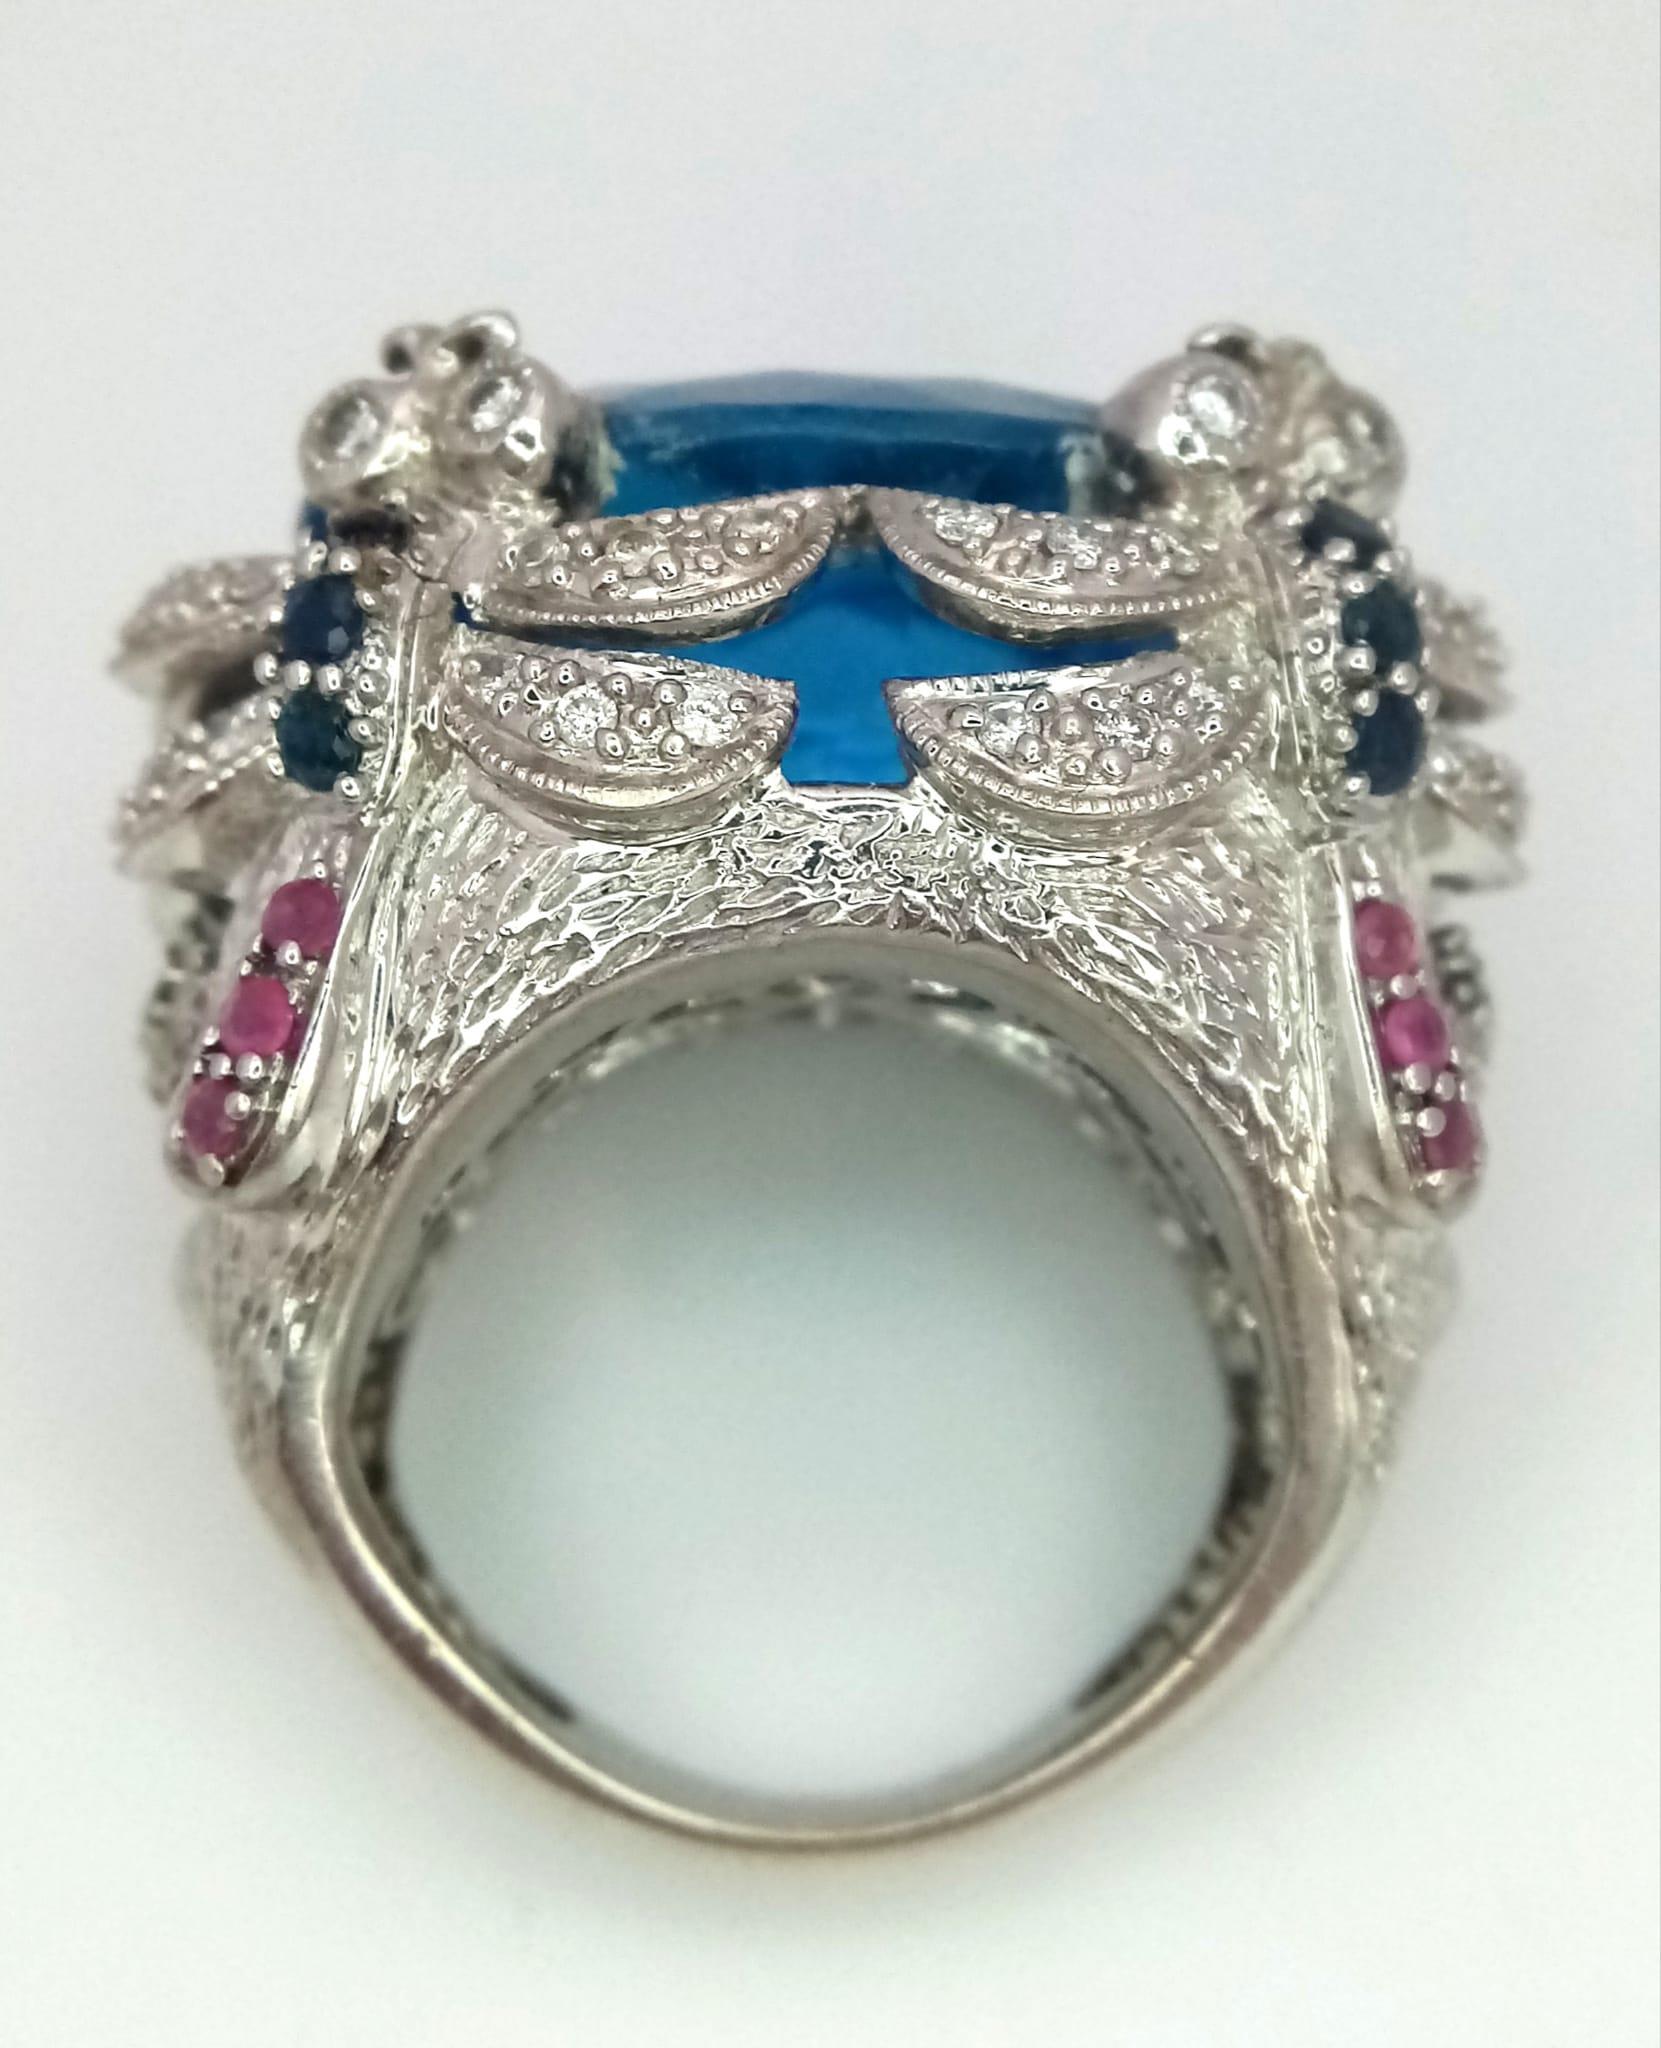 An 18kt White Gold Exquisite Fancy Cocktail Ring Set with Diamonds, Rubies, Sapphires & Emeralds - Image 10 of 10